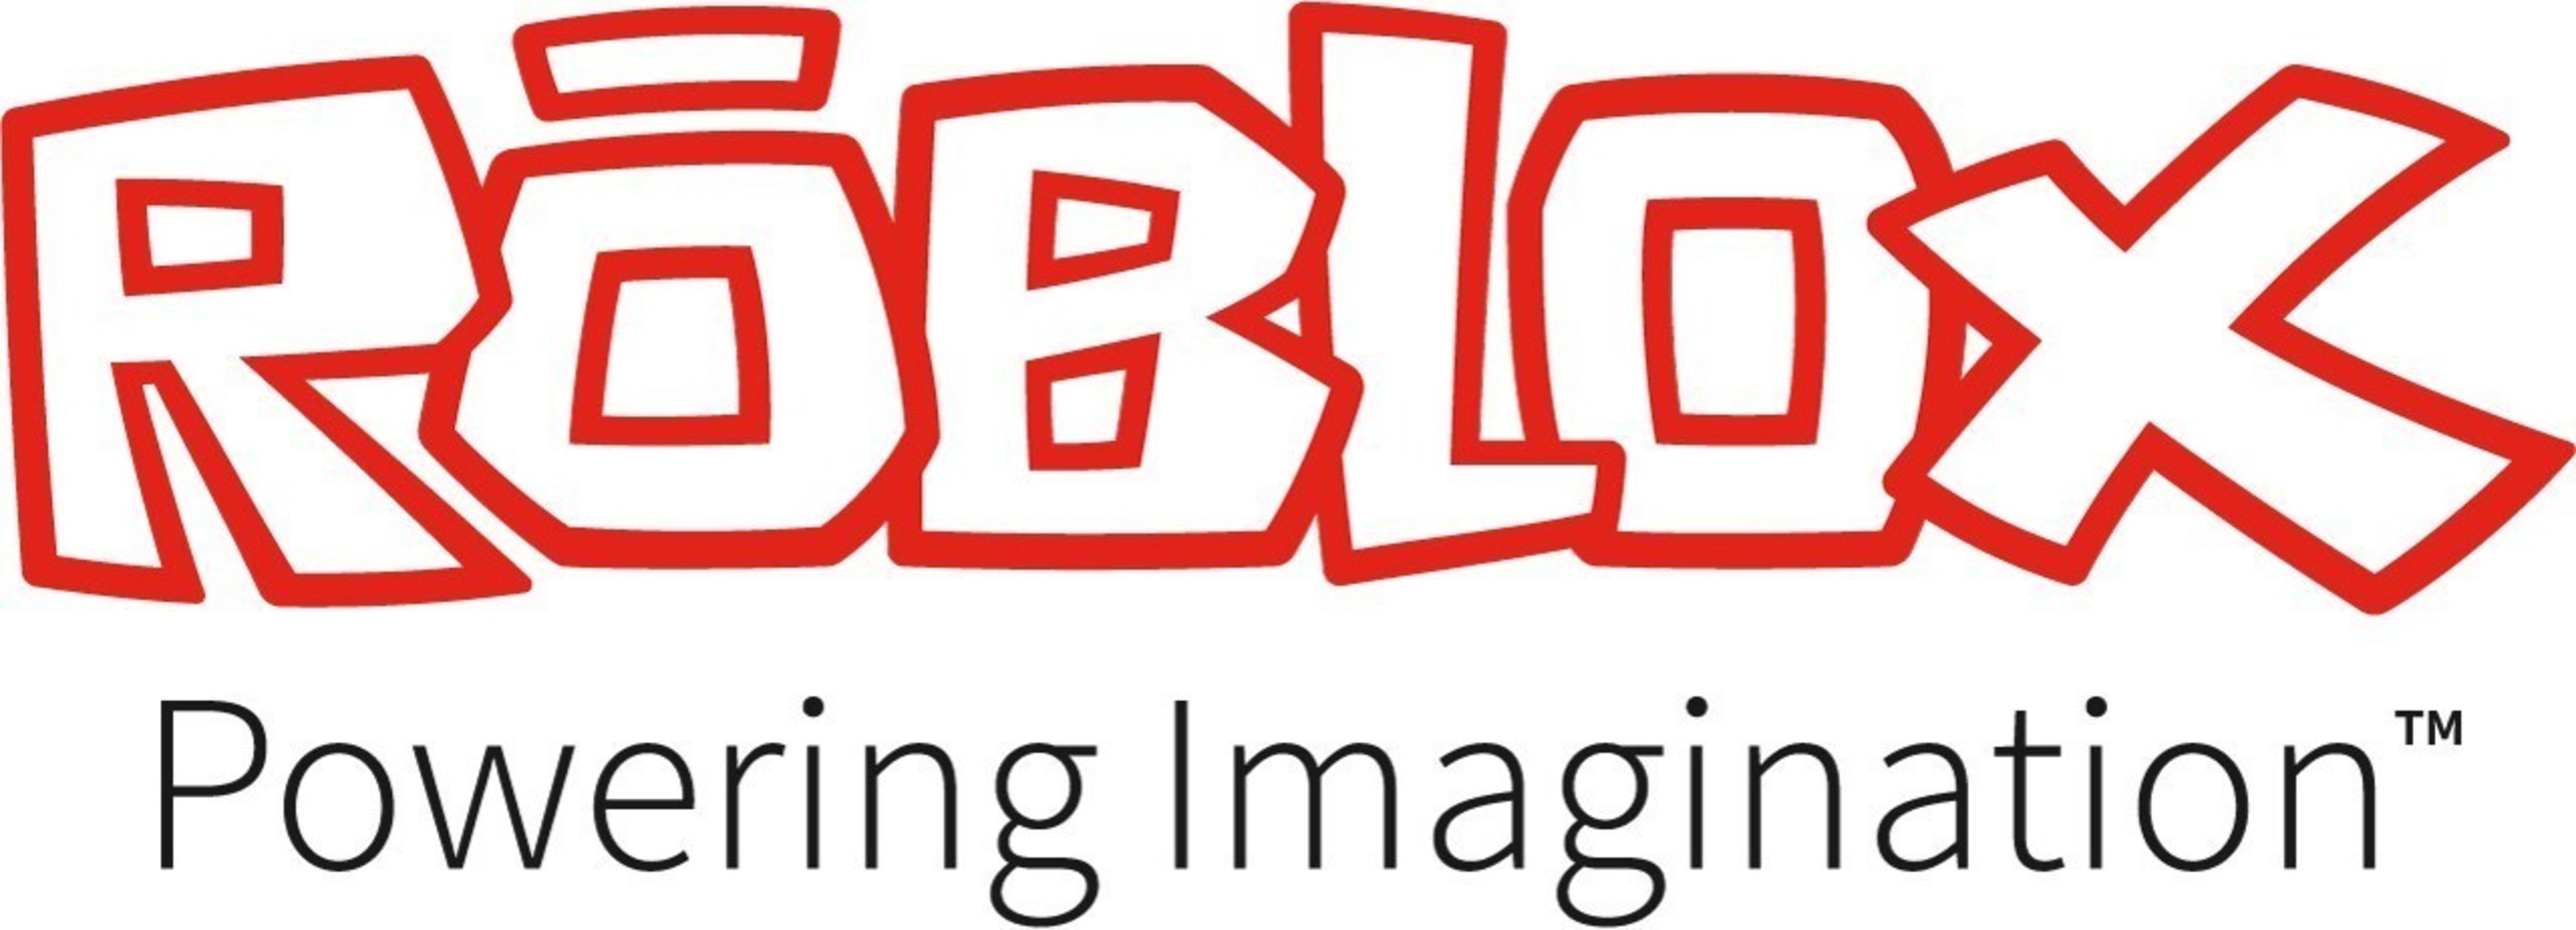 Roblox Expands Powering Imagination Vision By Launching Cross